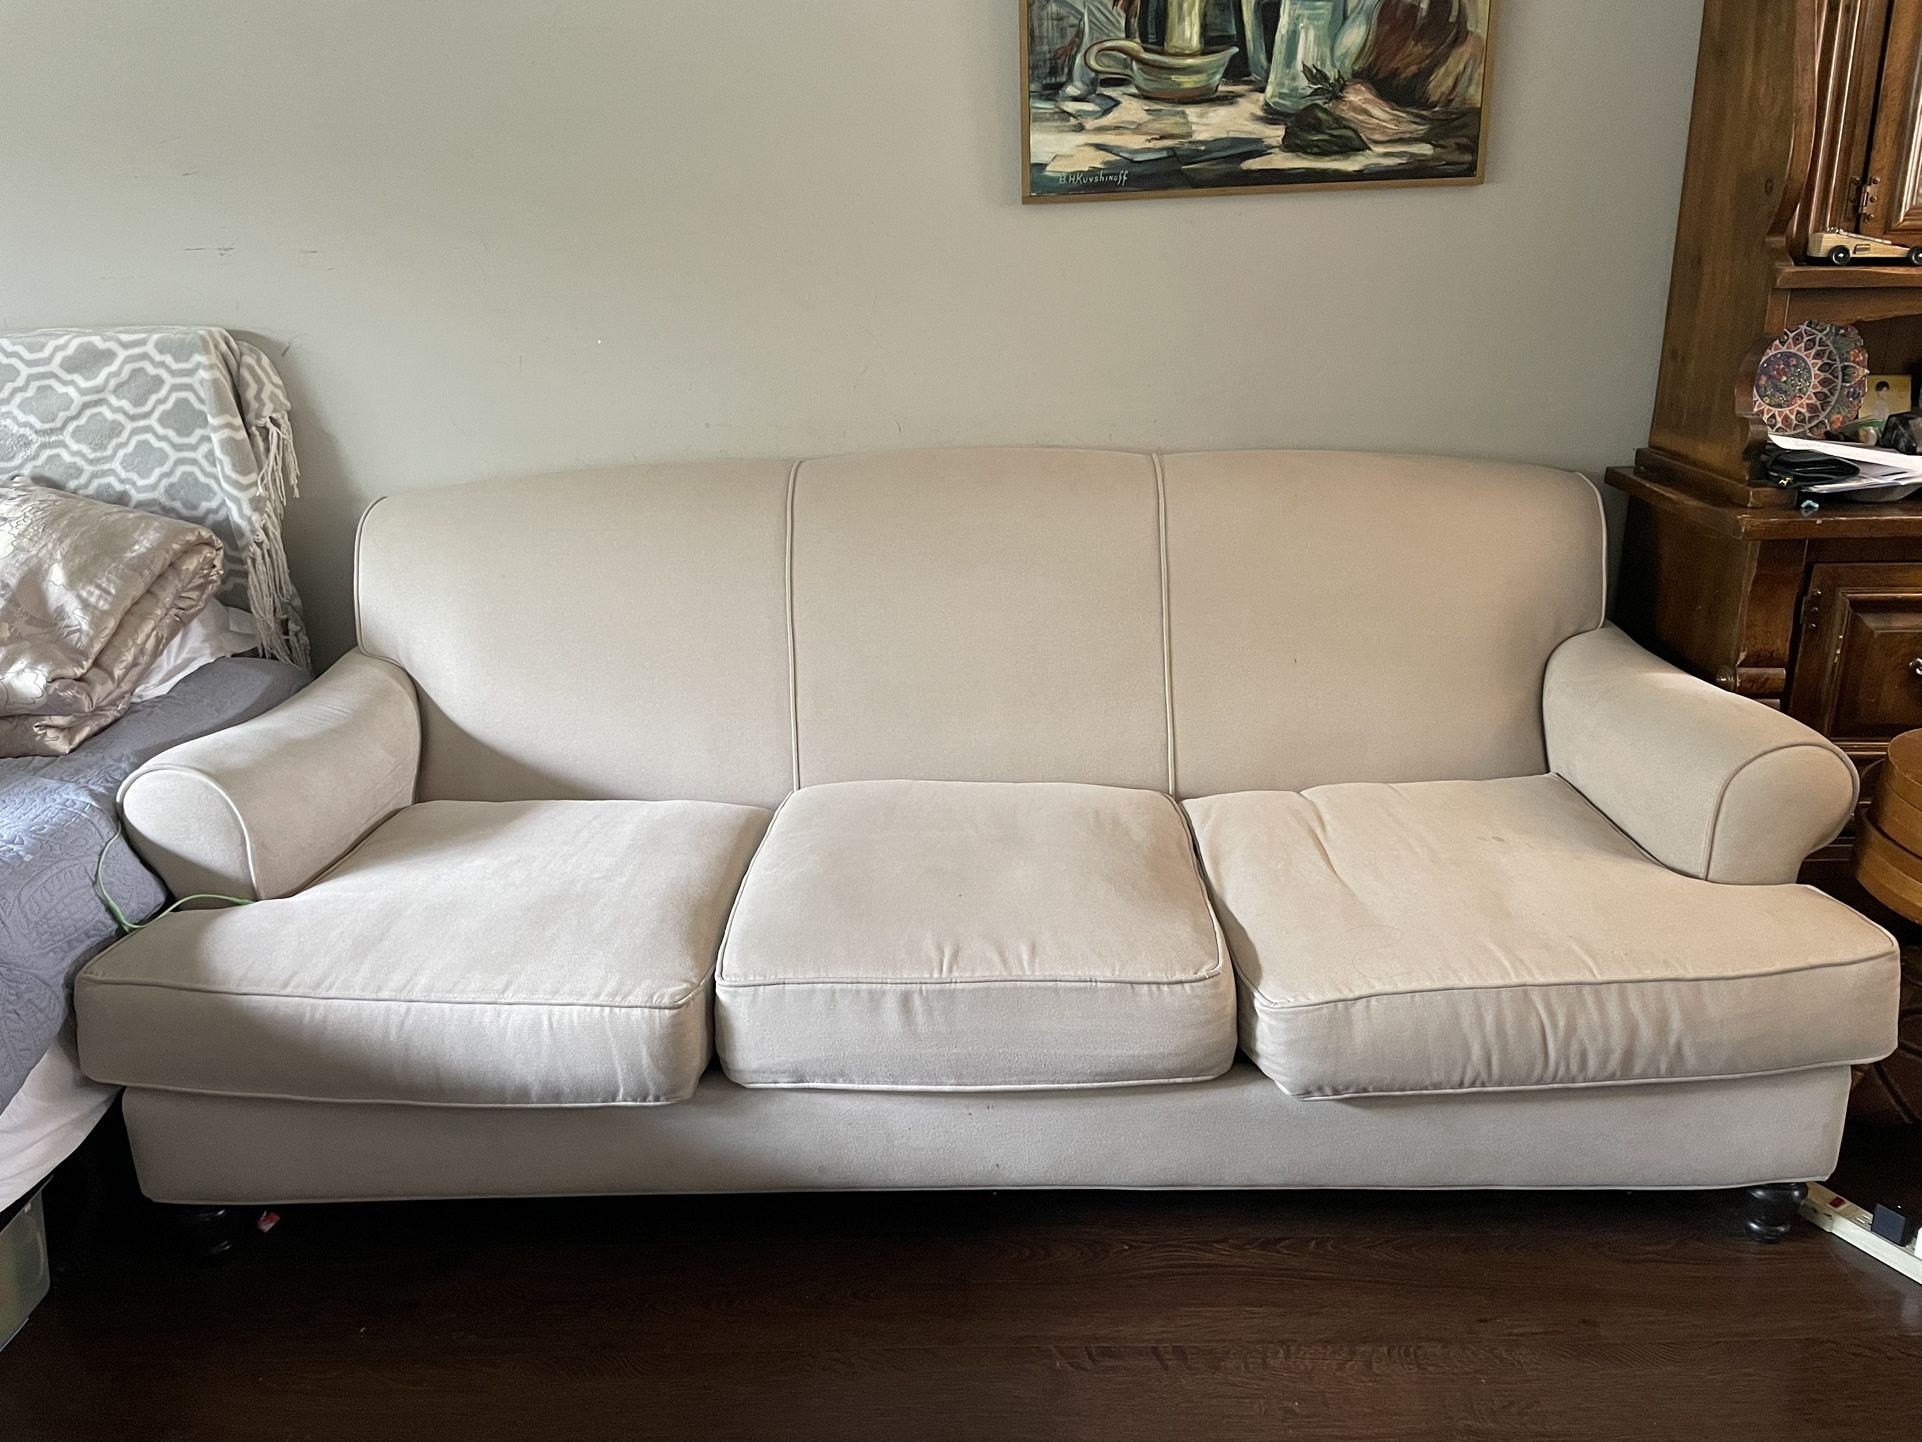 Couch/Sofa free